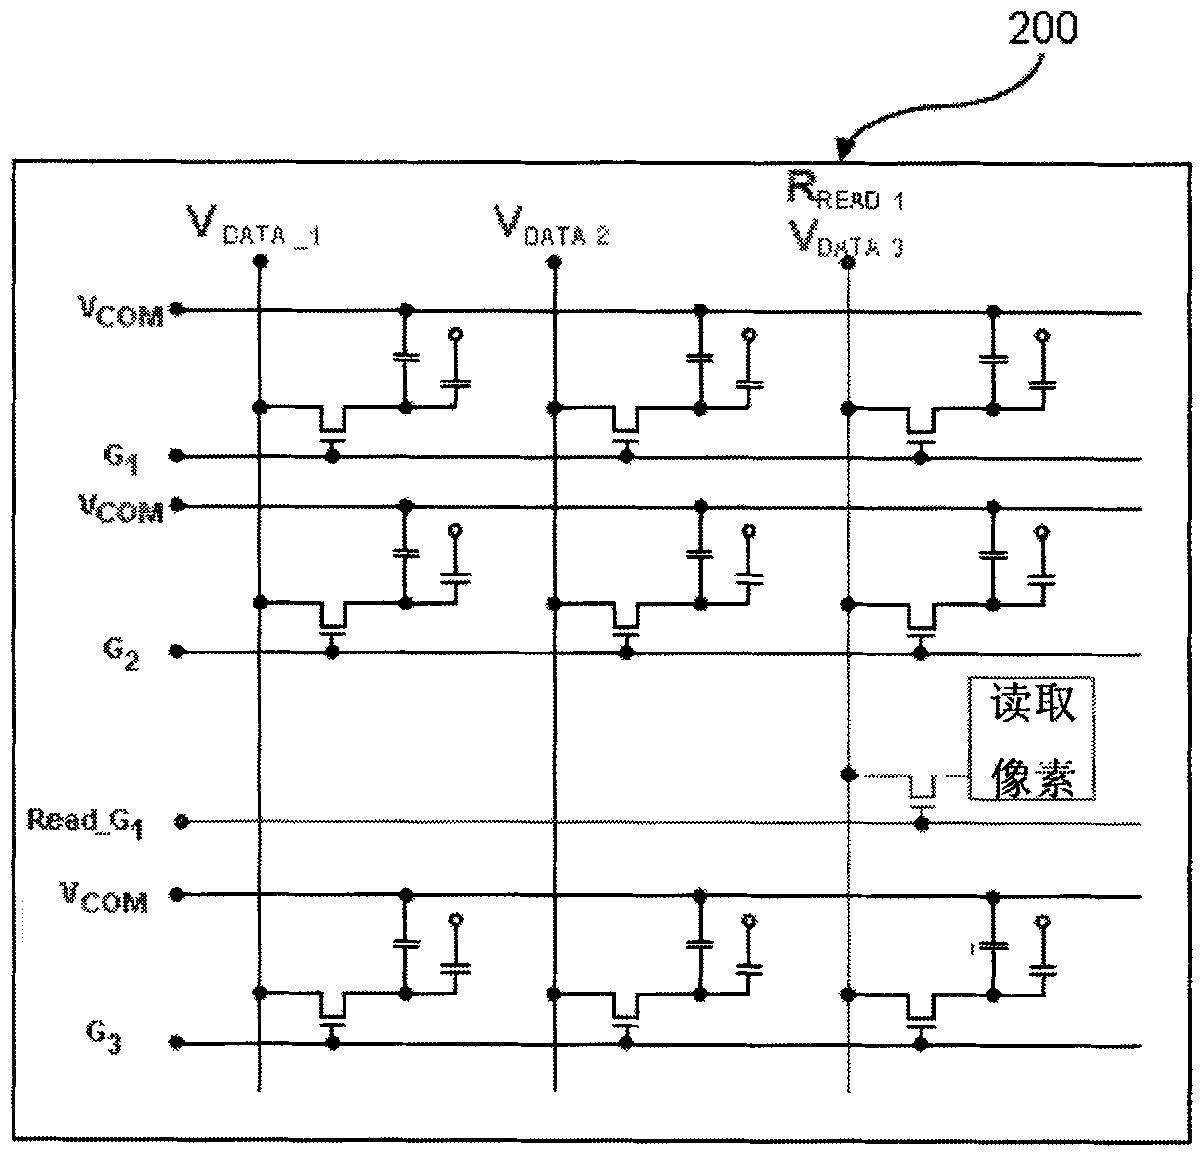 Touch screen liquid crystal display device